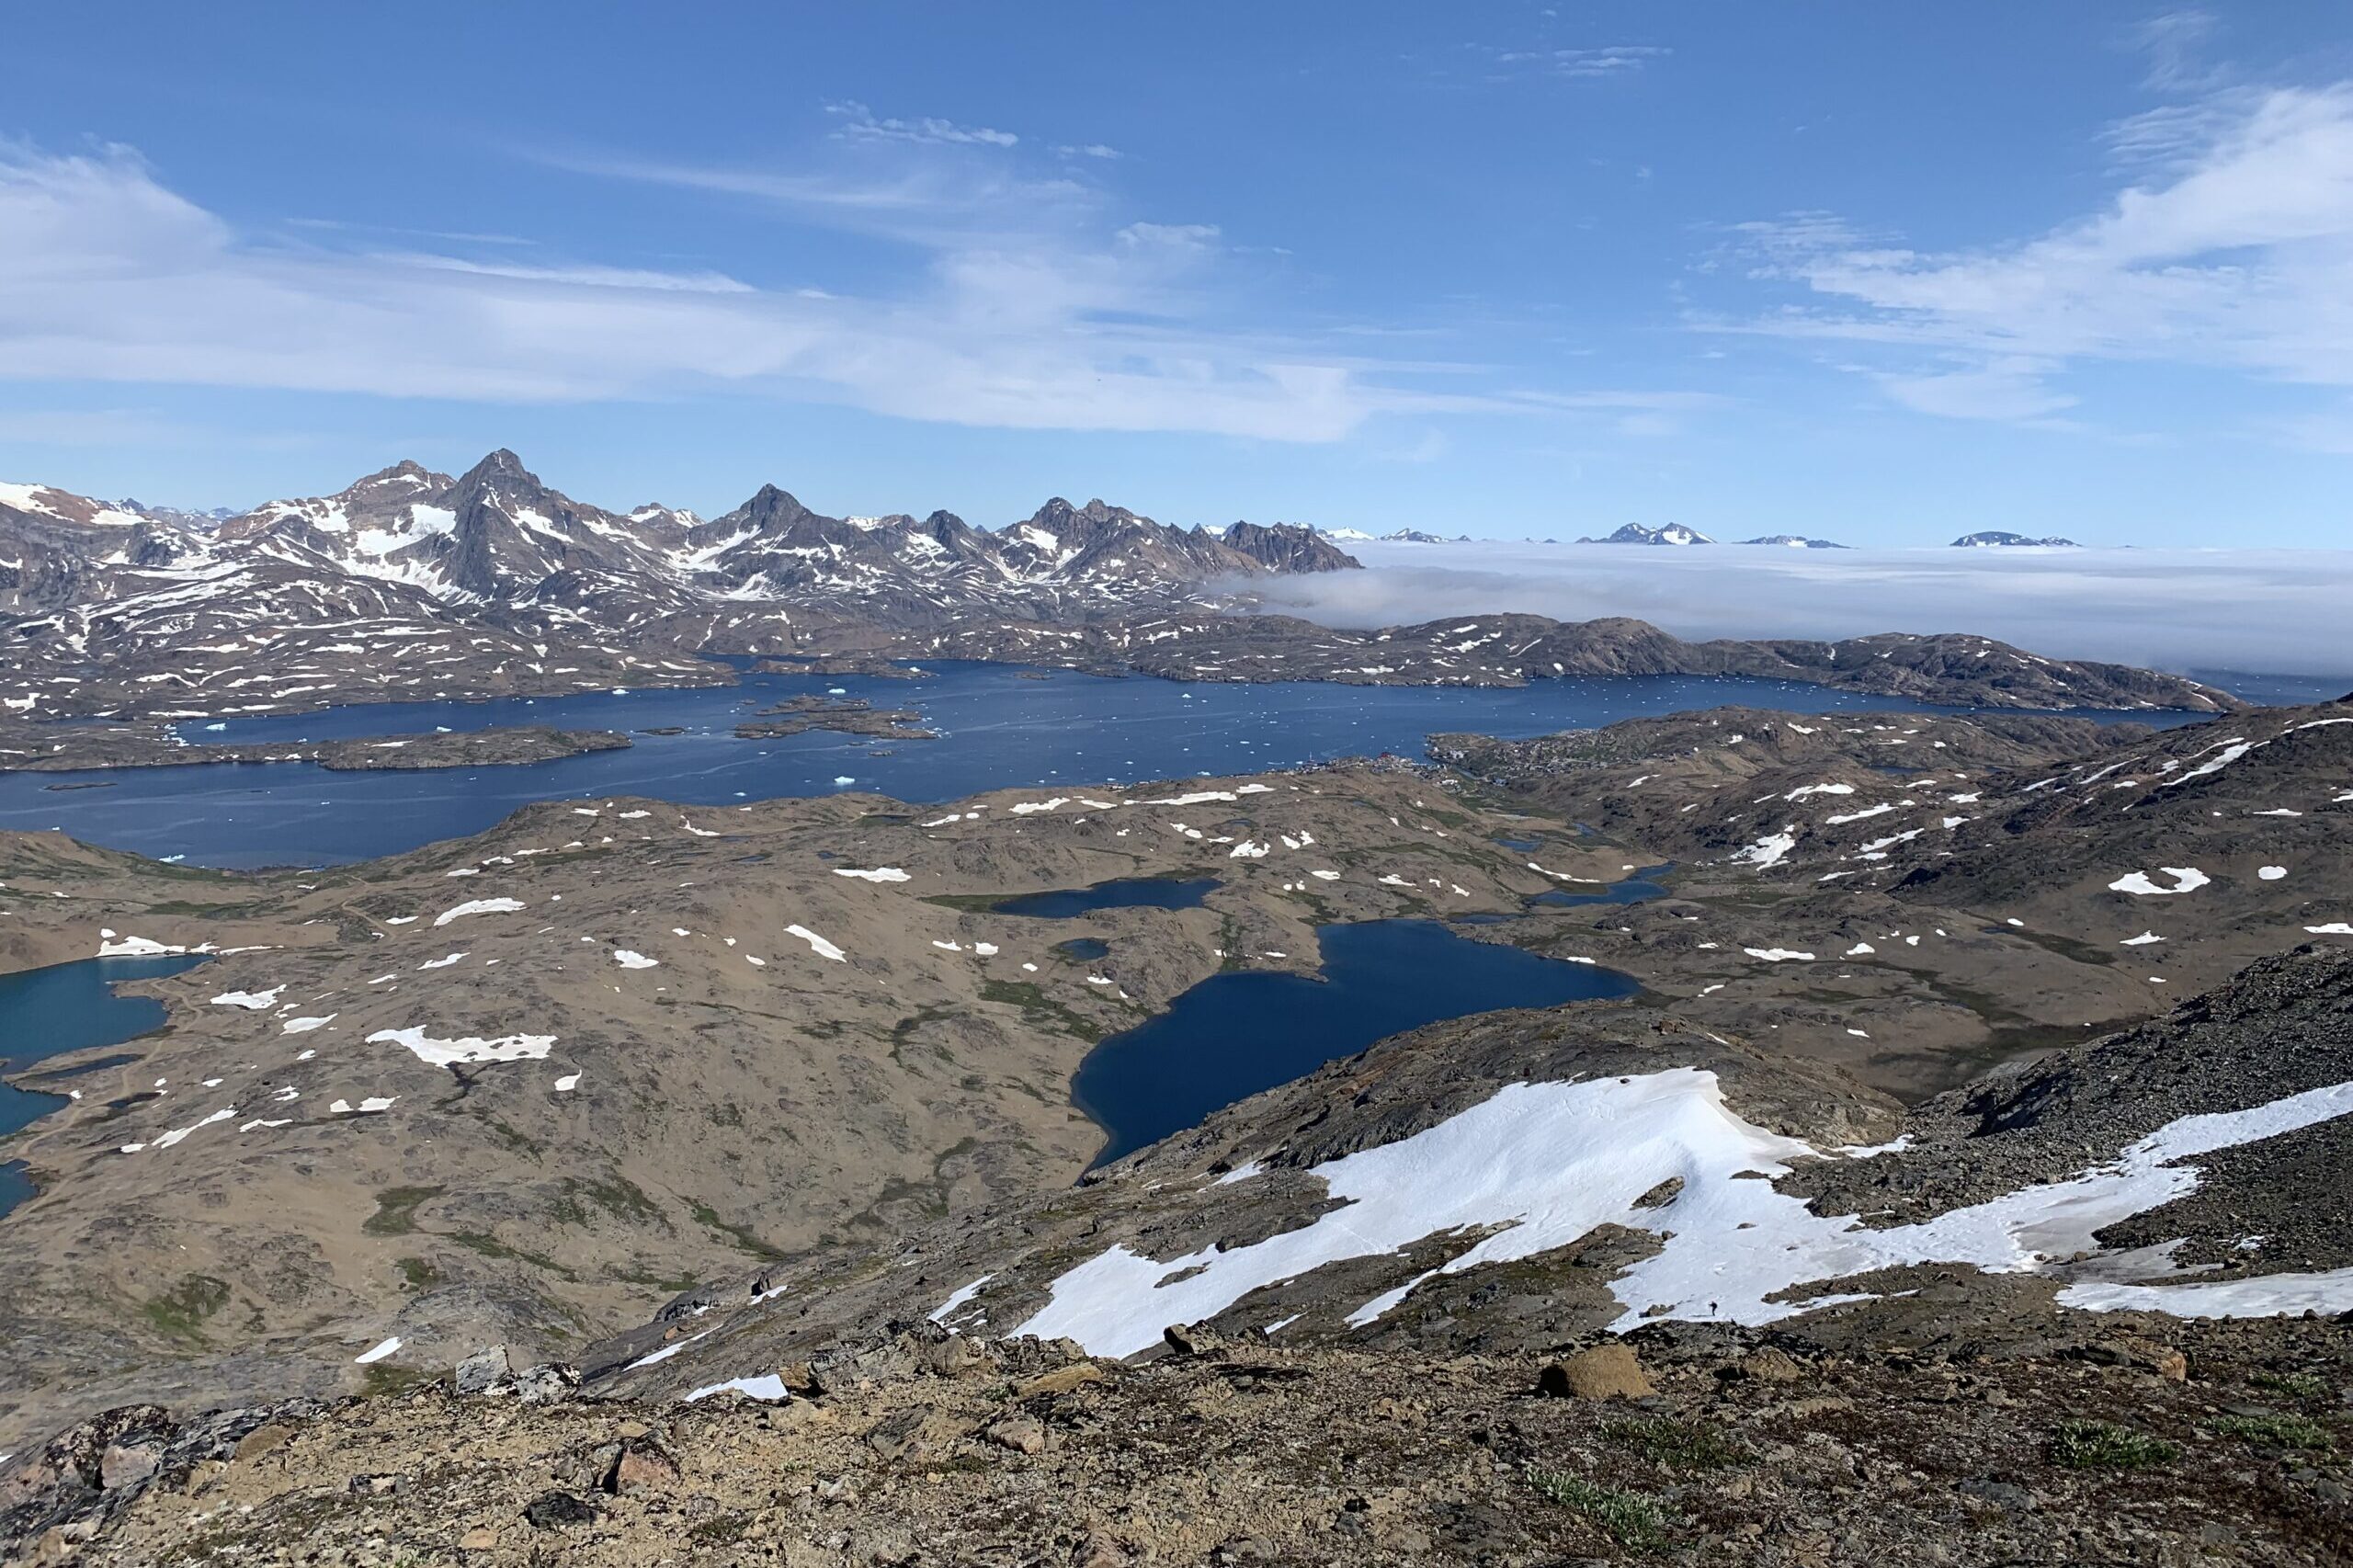 View from the Pyramid mountain to Tasiilaq. Photo by Natalia Andersen - Visit East Greenland